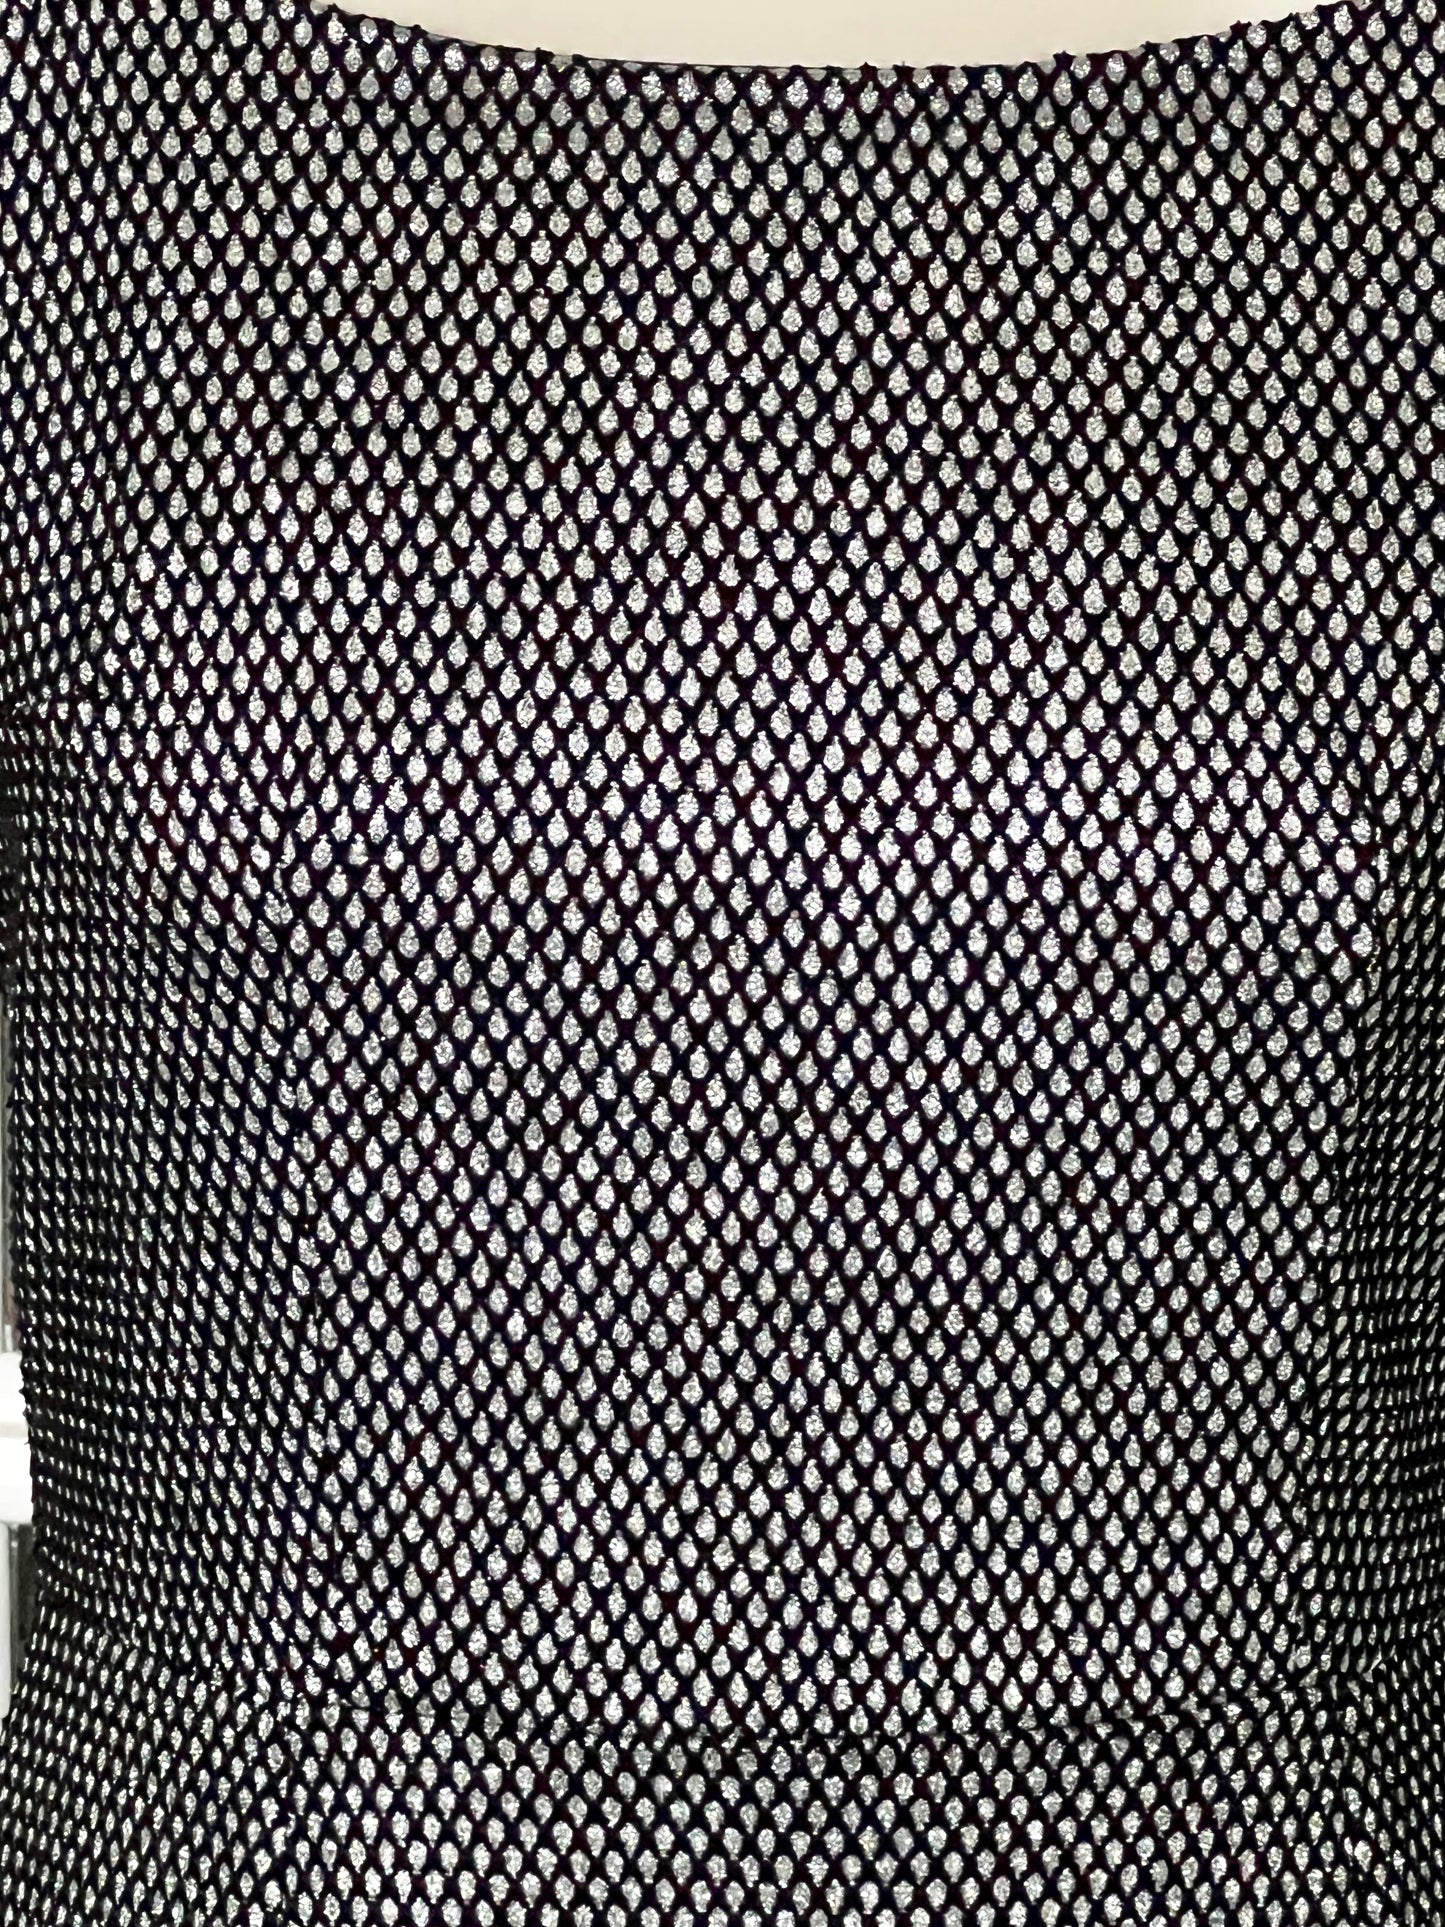 Vintage 1950s style silver lurex and black fishnet wiggle dress M only